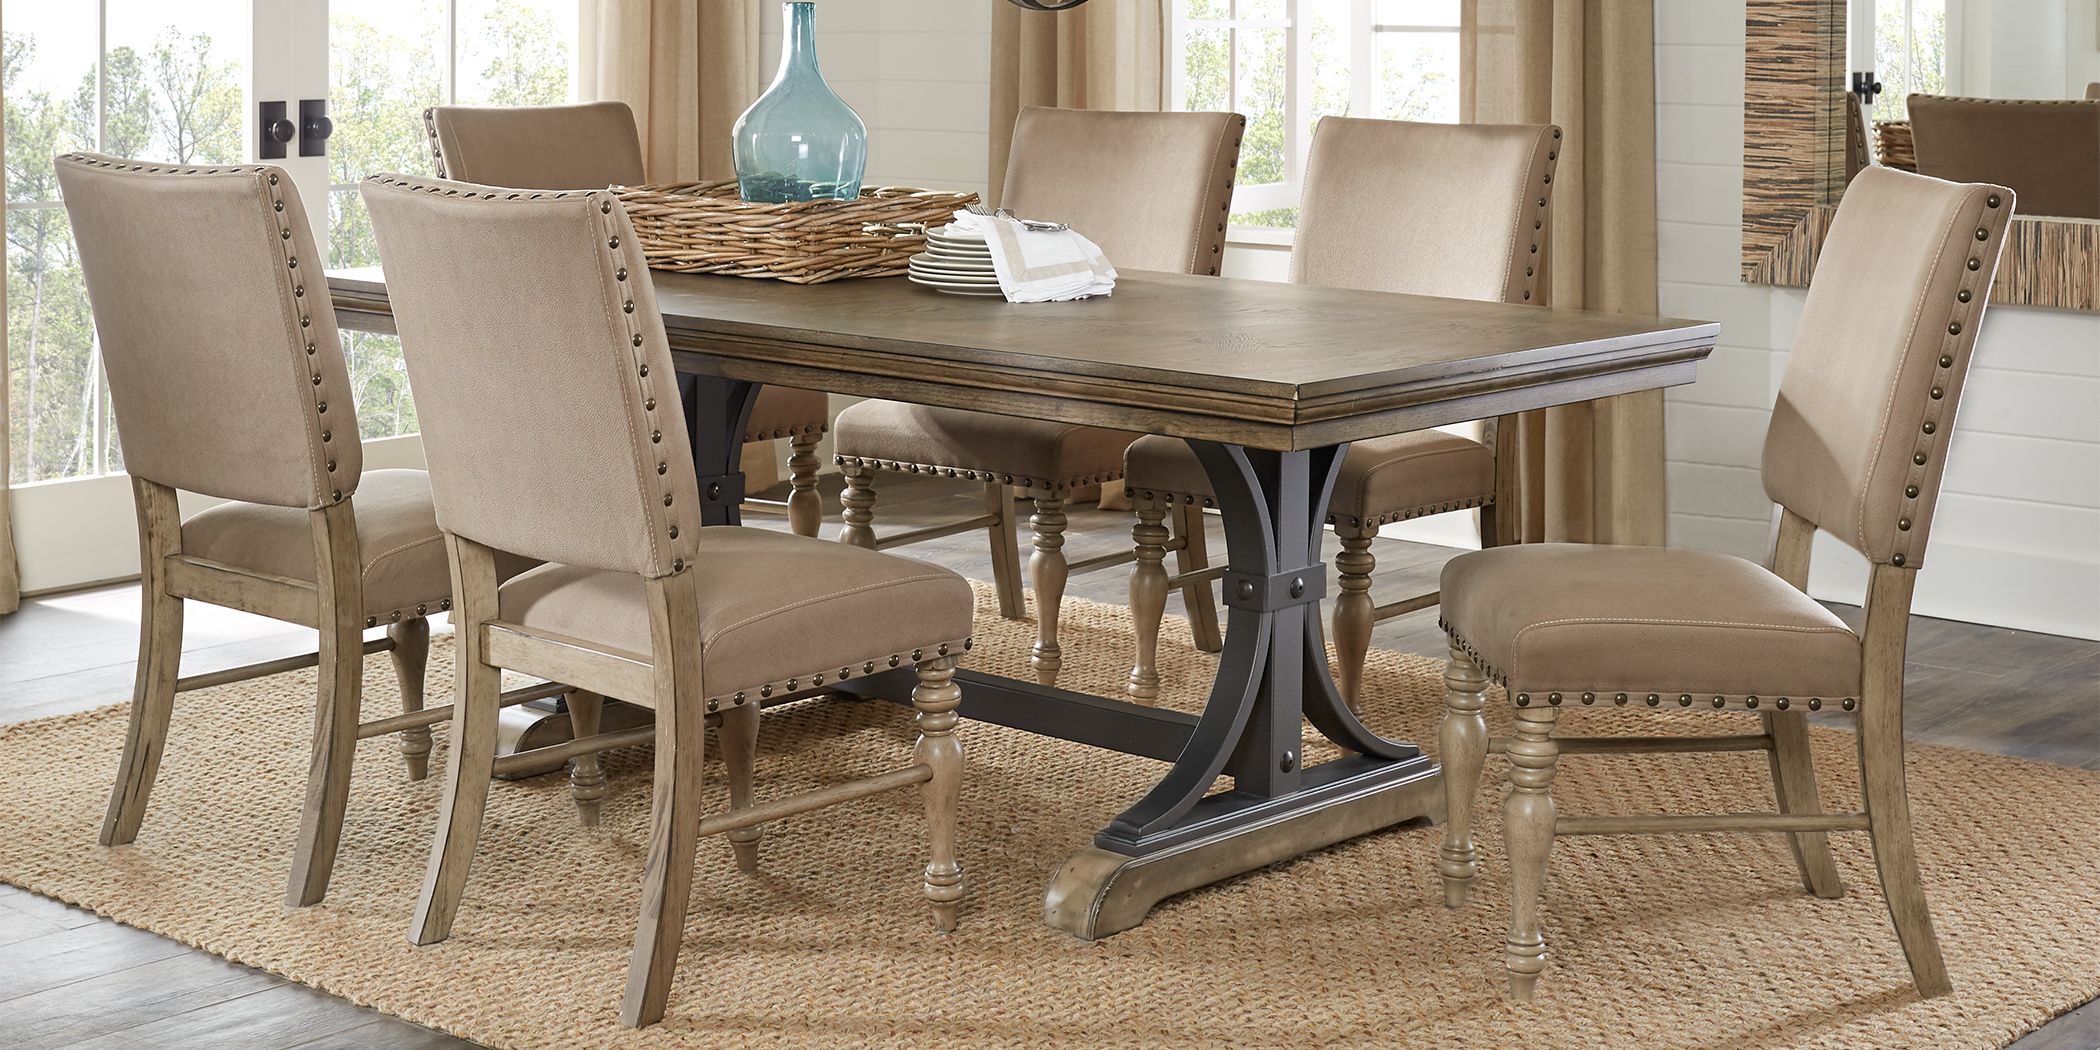 Rooms To Go Dining Room Sets On, Rooms To Go Furniture Dining Room Chairs